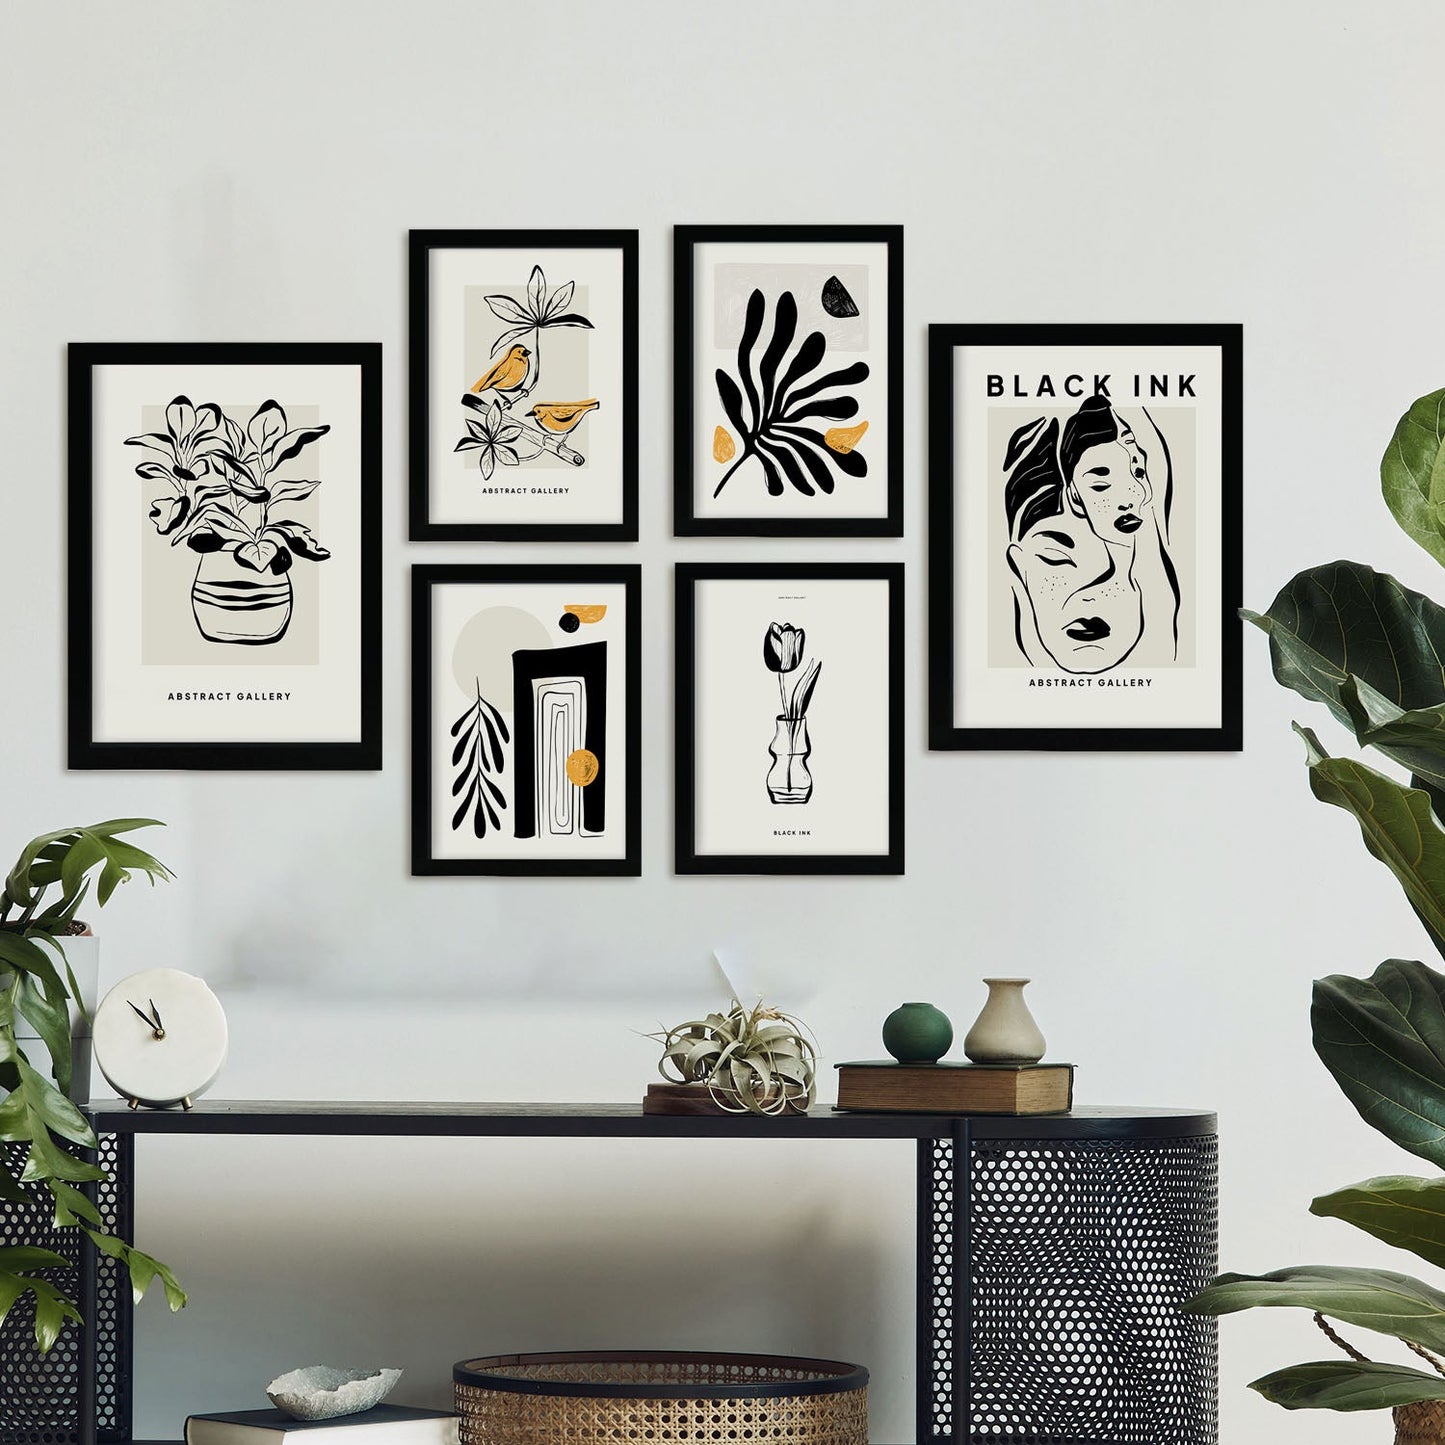 Thick Black Ink Posters. Oriental. Artistic and Abstract Aesthetic-Artwork-Nacnic-Nacnic Estudio SL